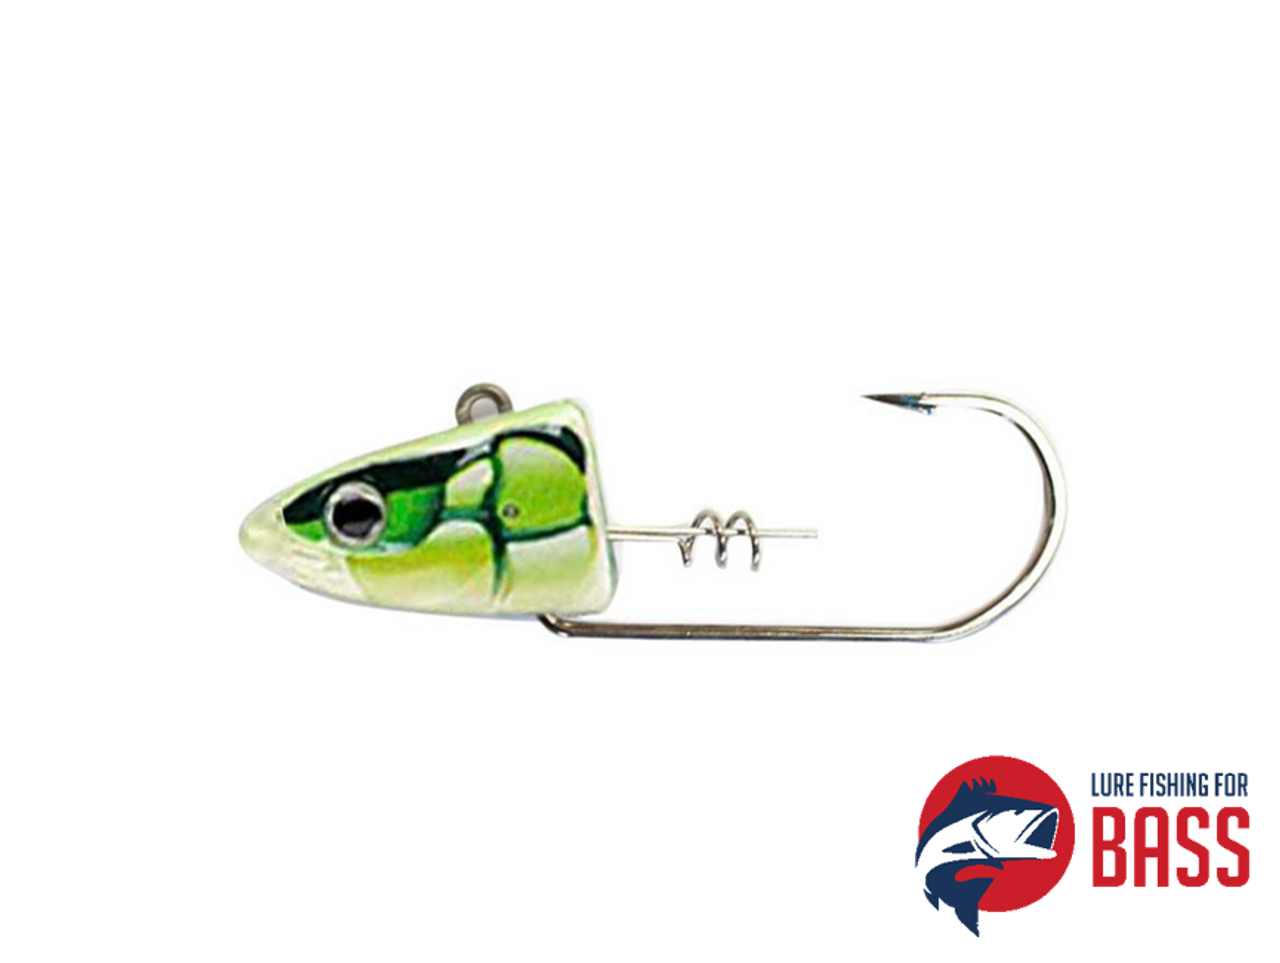 https://cdn11.bigcommerce.com/s-h9hha4a/images/stencil/1280x1280/products/5811/19827/Storm_360GT_Costal_Biscay_Minnow_Jighead_22g_Green_Mackerel__97407.1606037778.png?c=2